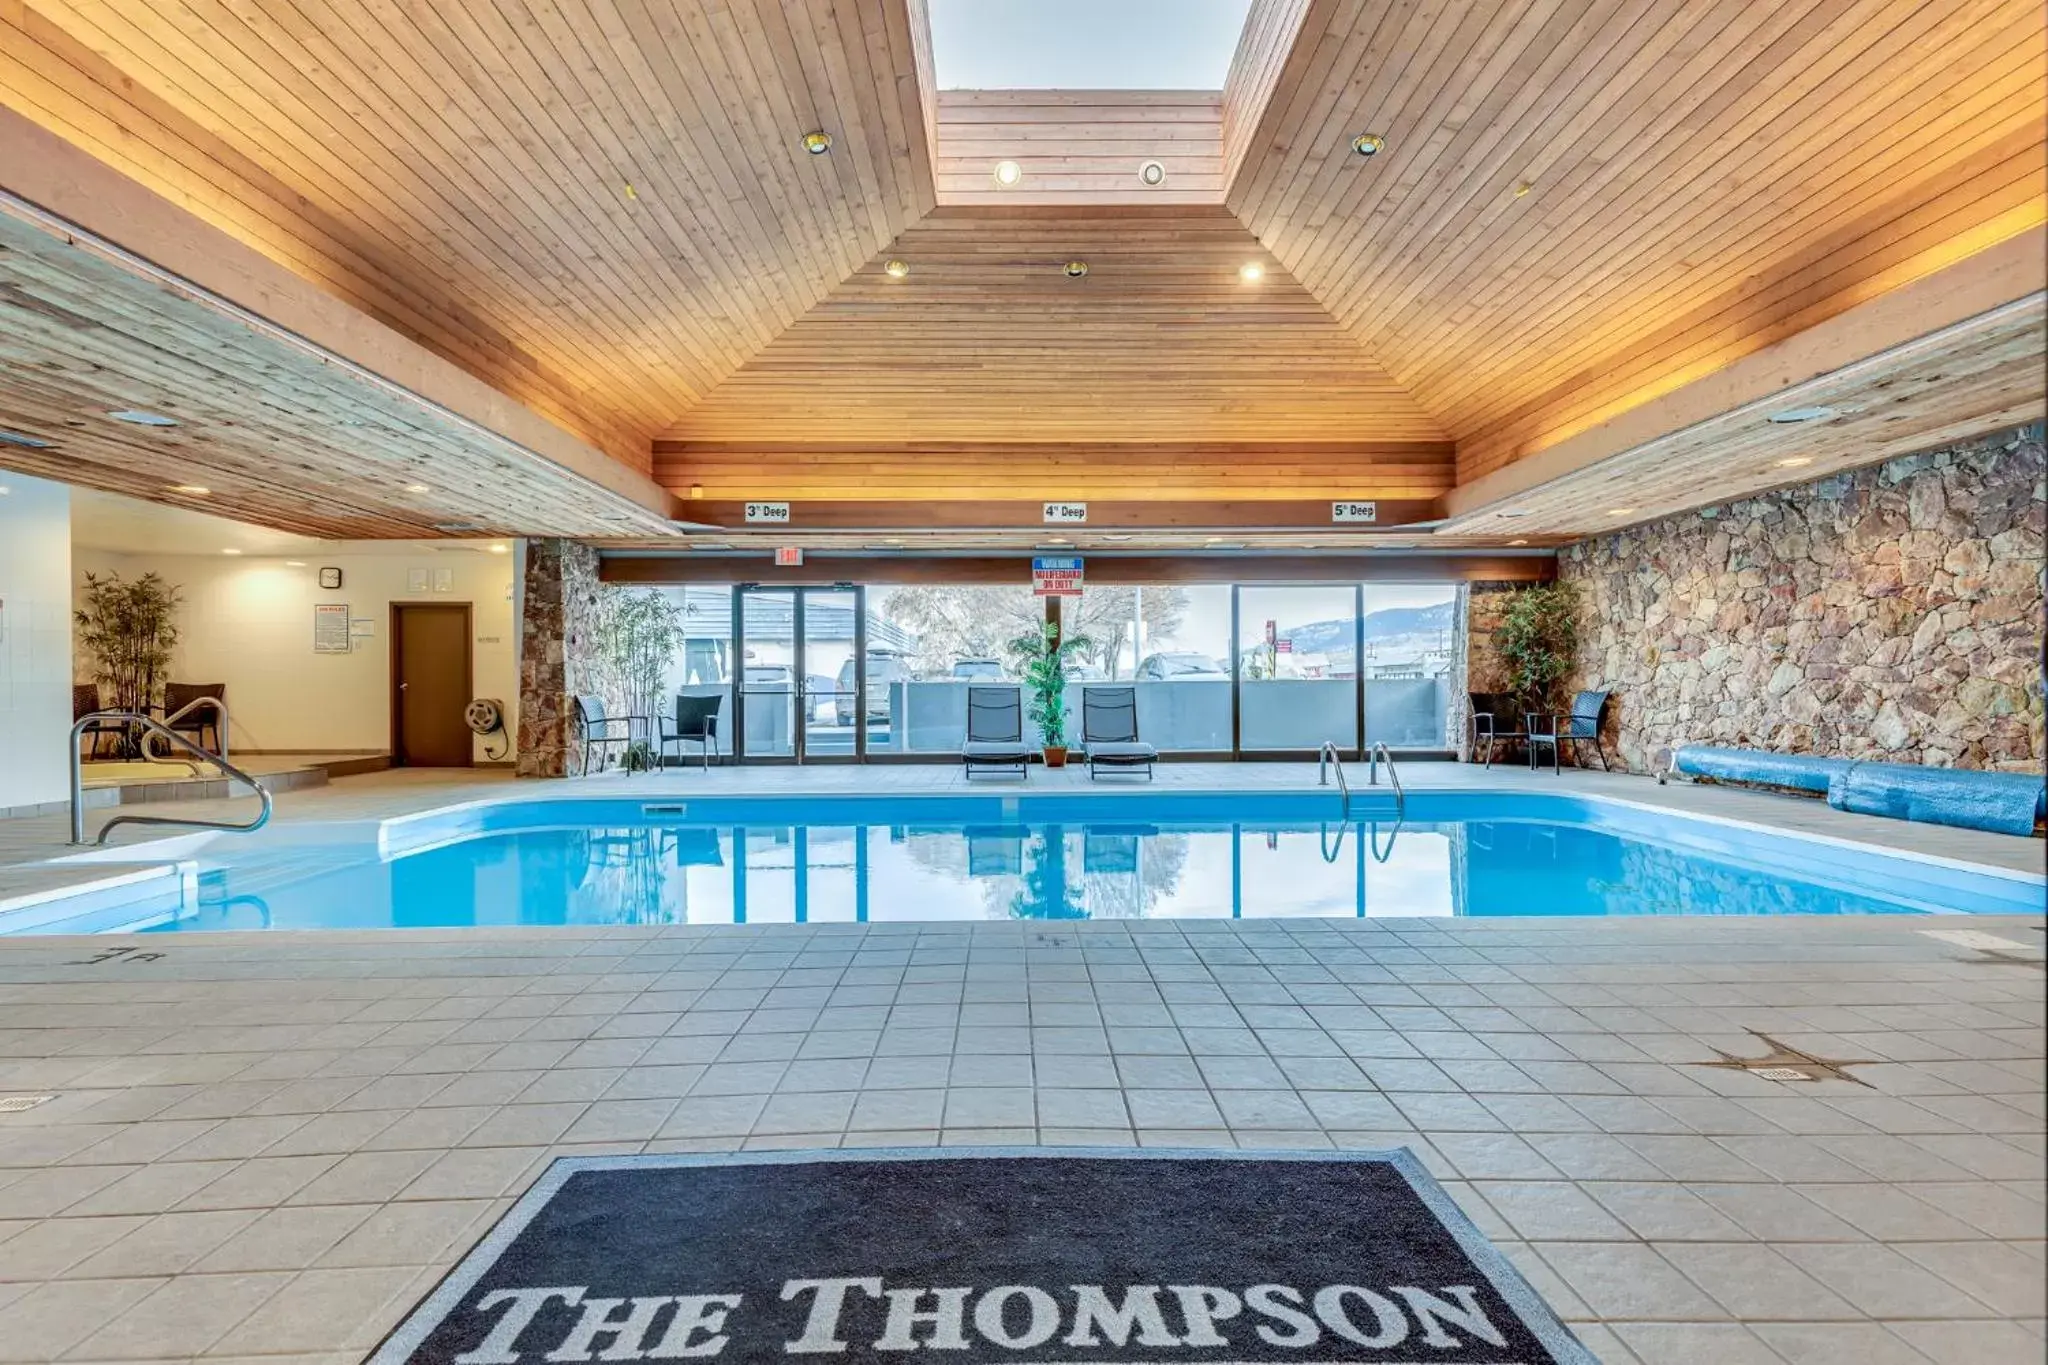 Swimming Pool in The Thompson Hotel